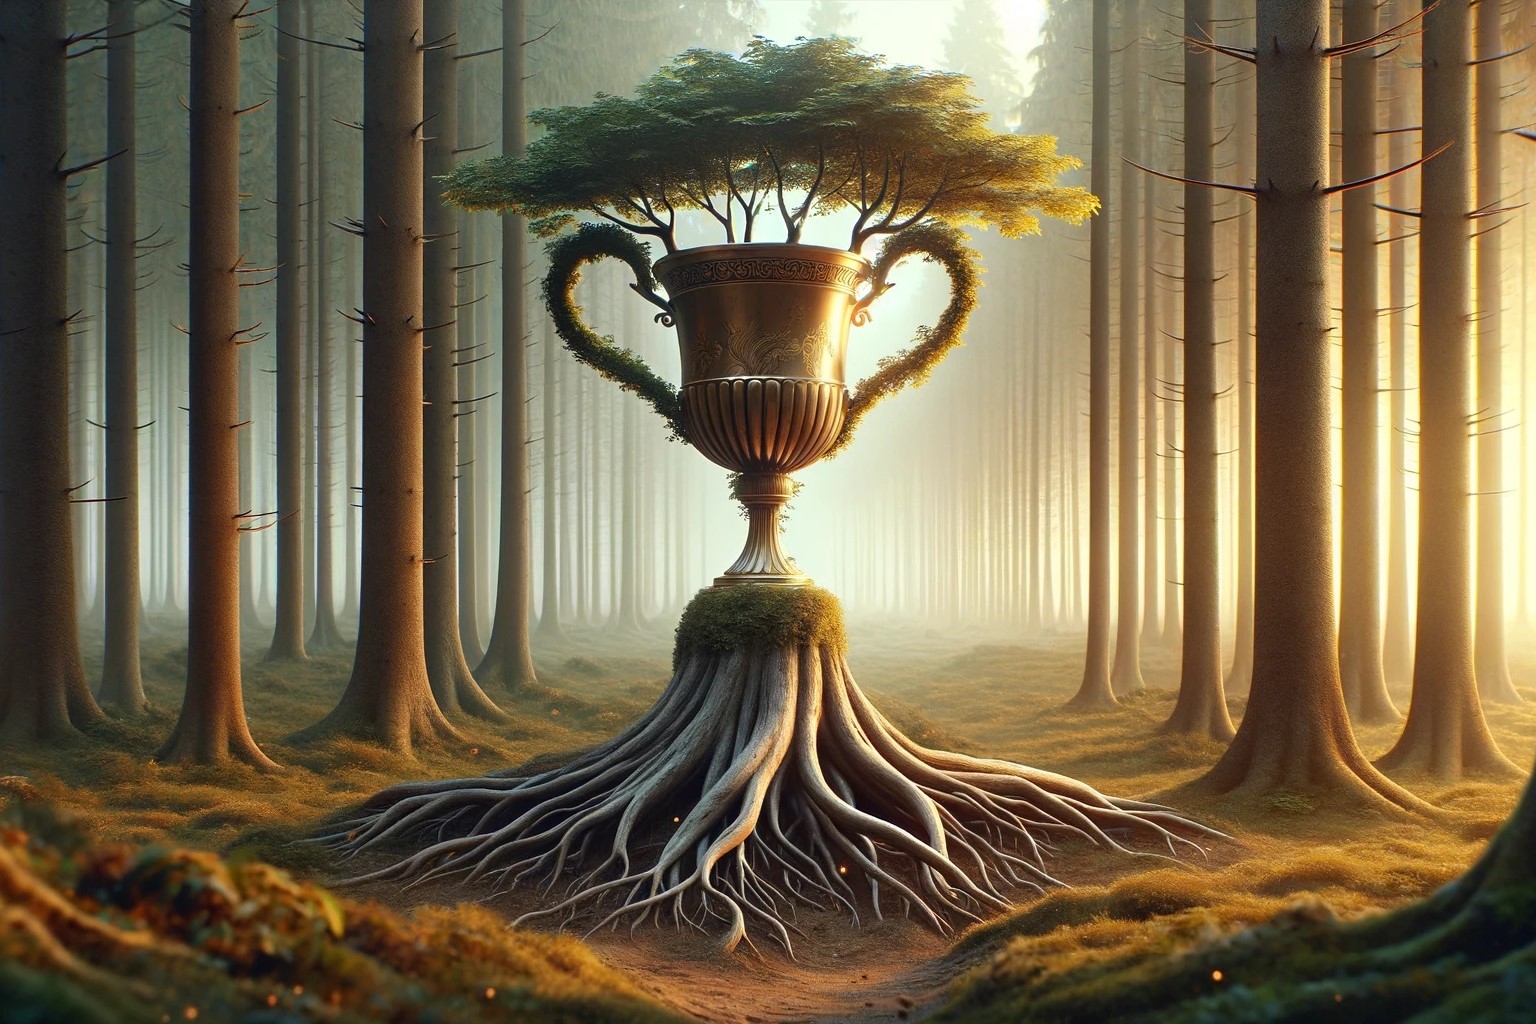 A trophy made of tree branches sitting in the forest.